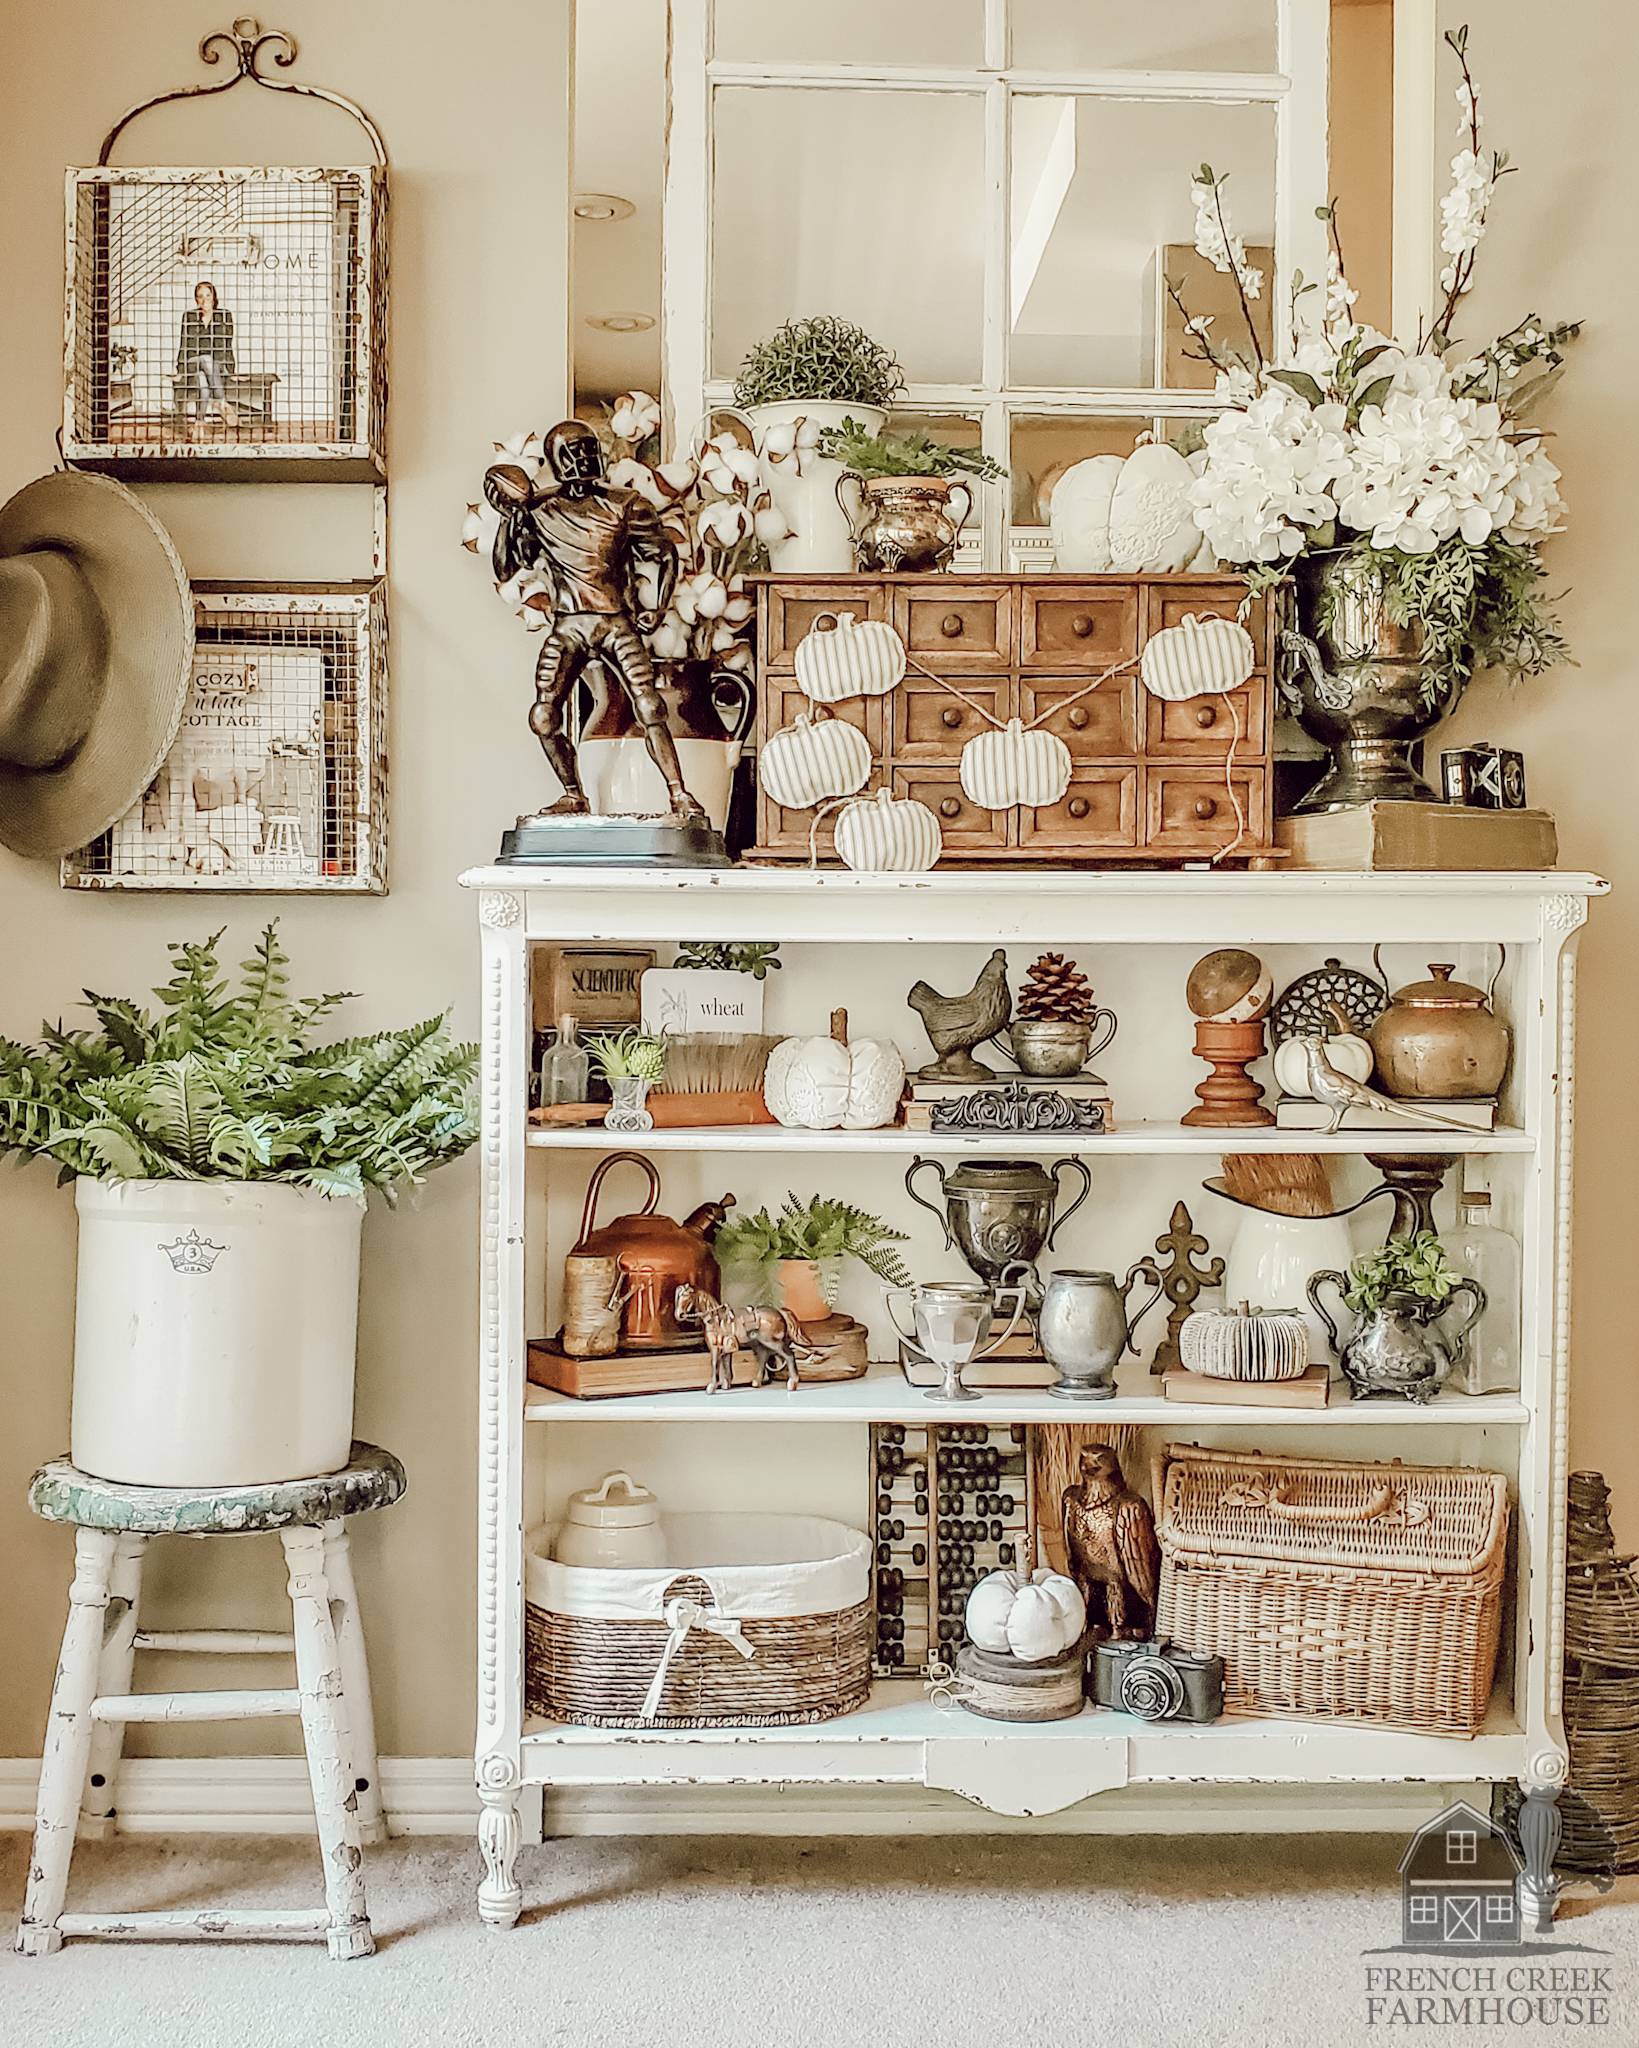 Antique bookshelves are decorated with vintage items for fall